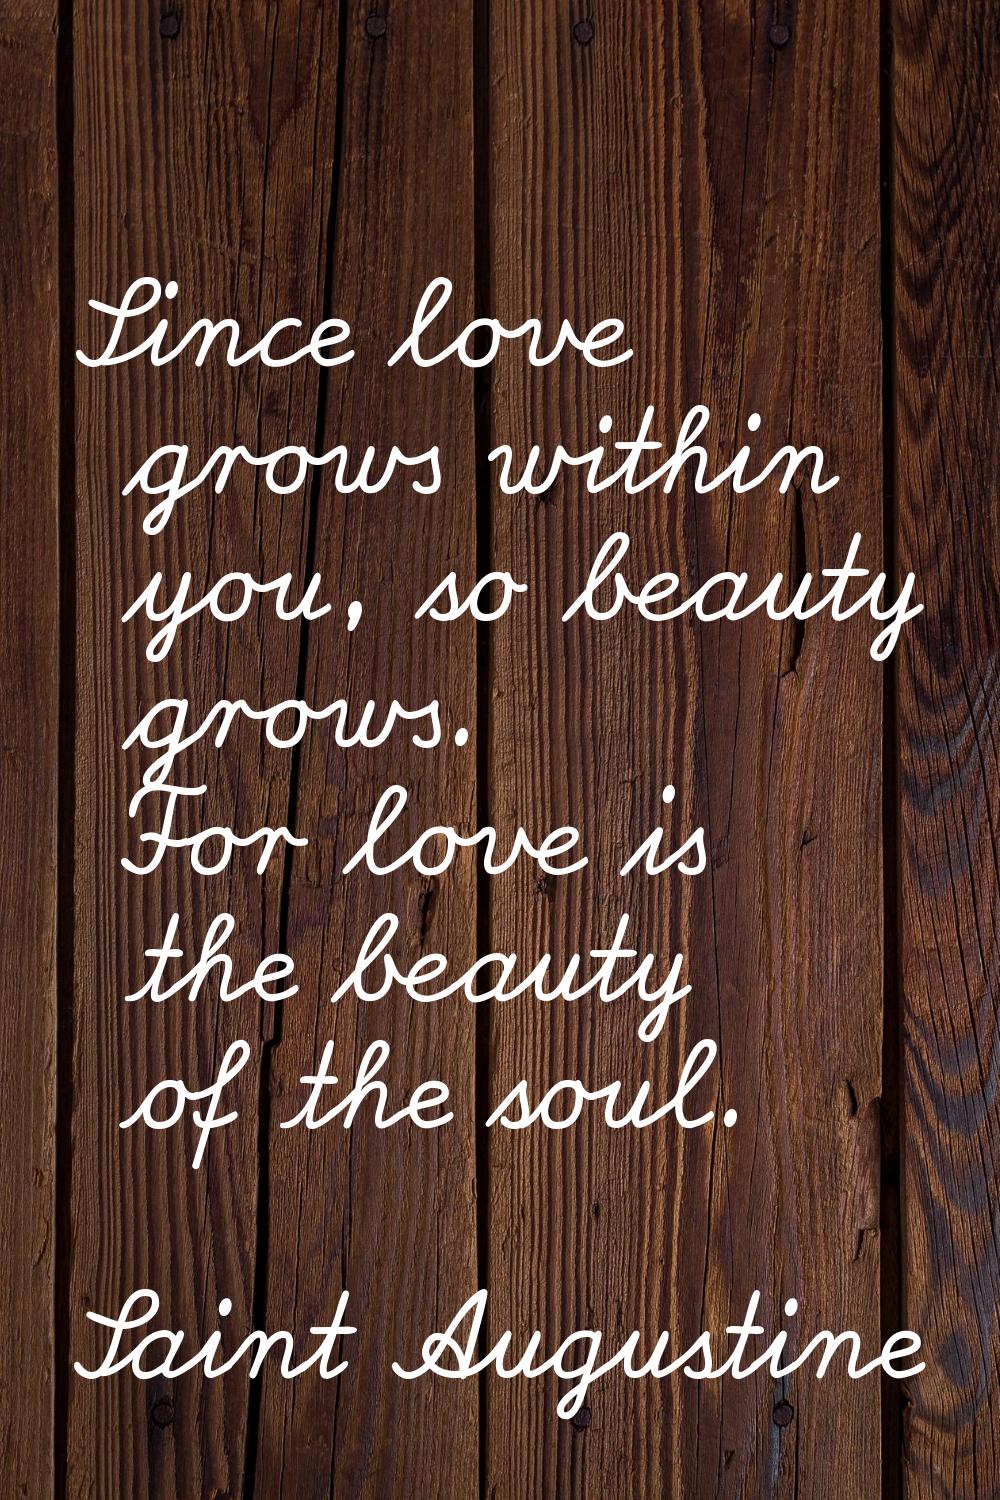 Since love grows within you, so beauty grows. For love is the beauty of the soul.